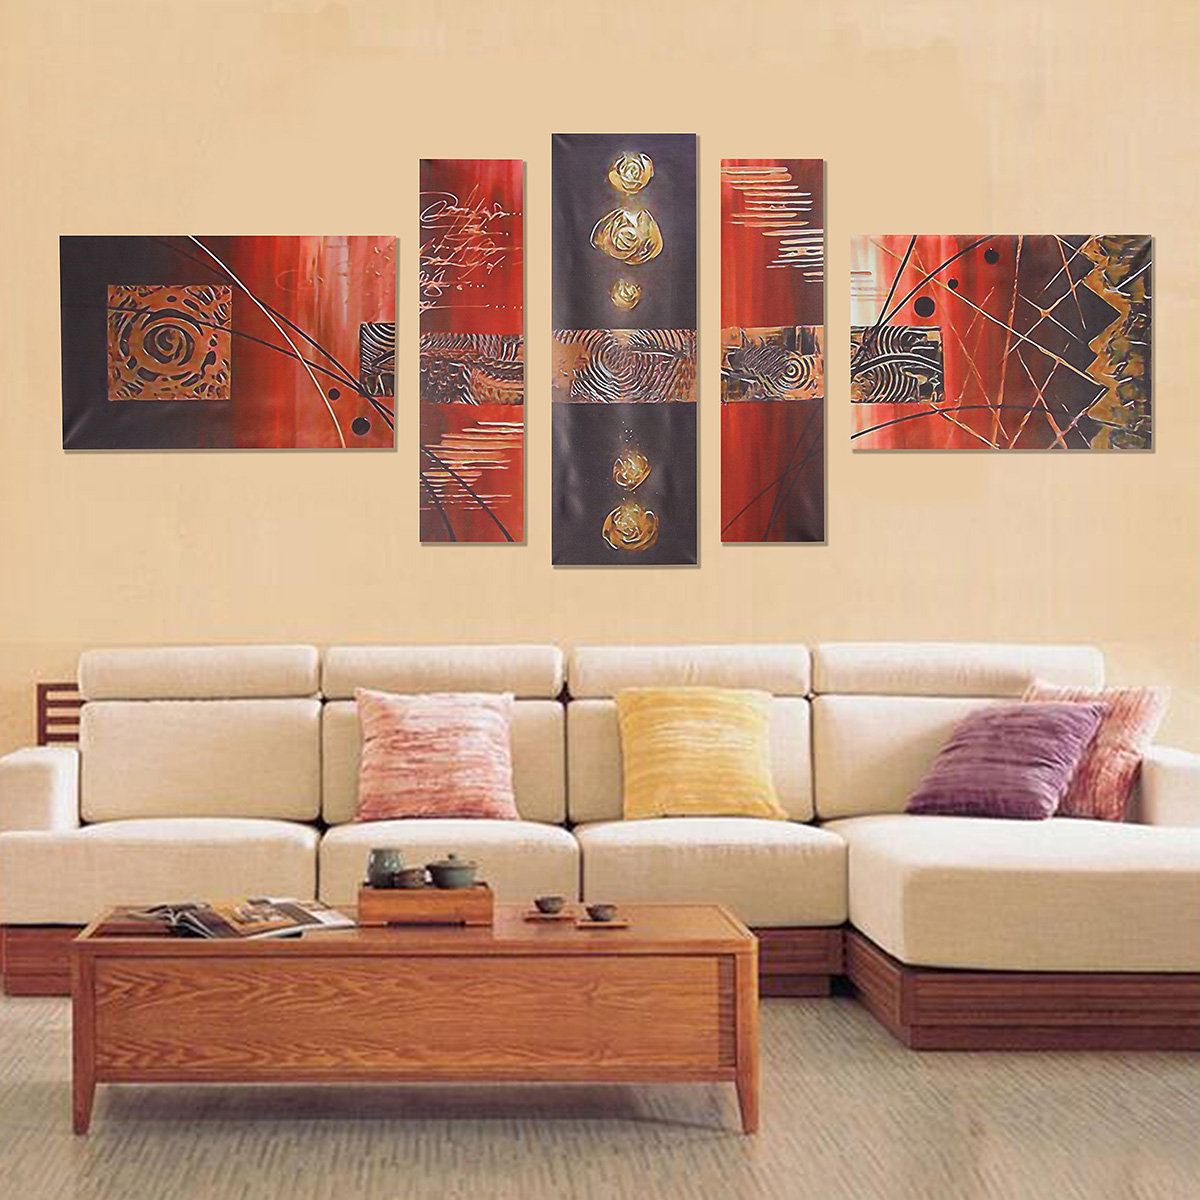 

5PCS Unframed Modern Combined Abstract Art Oil Painting Canvas Wall Decor